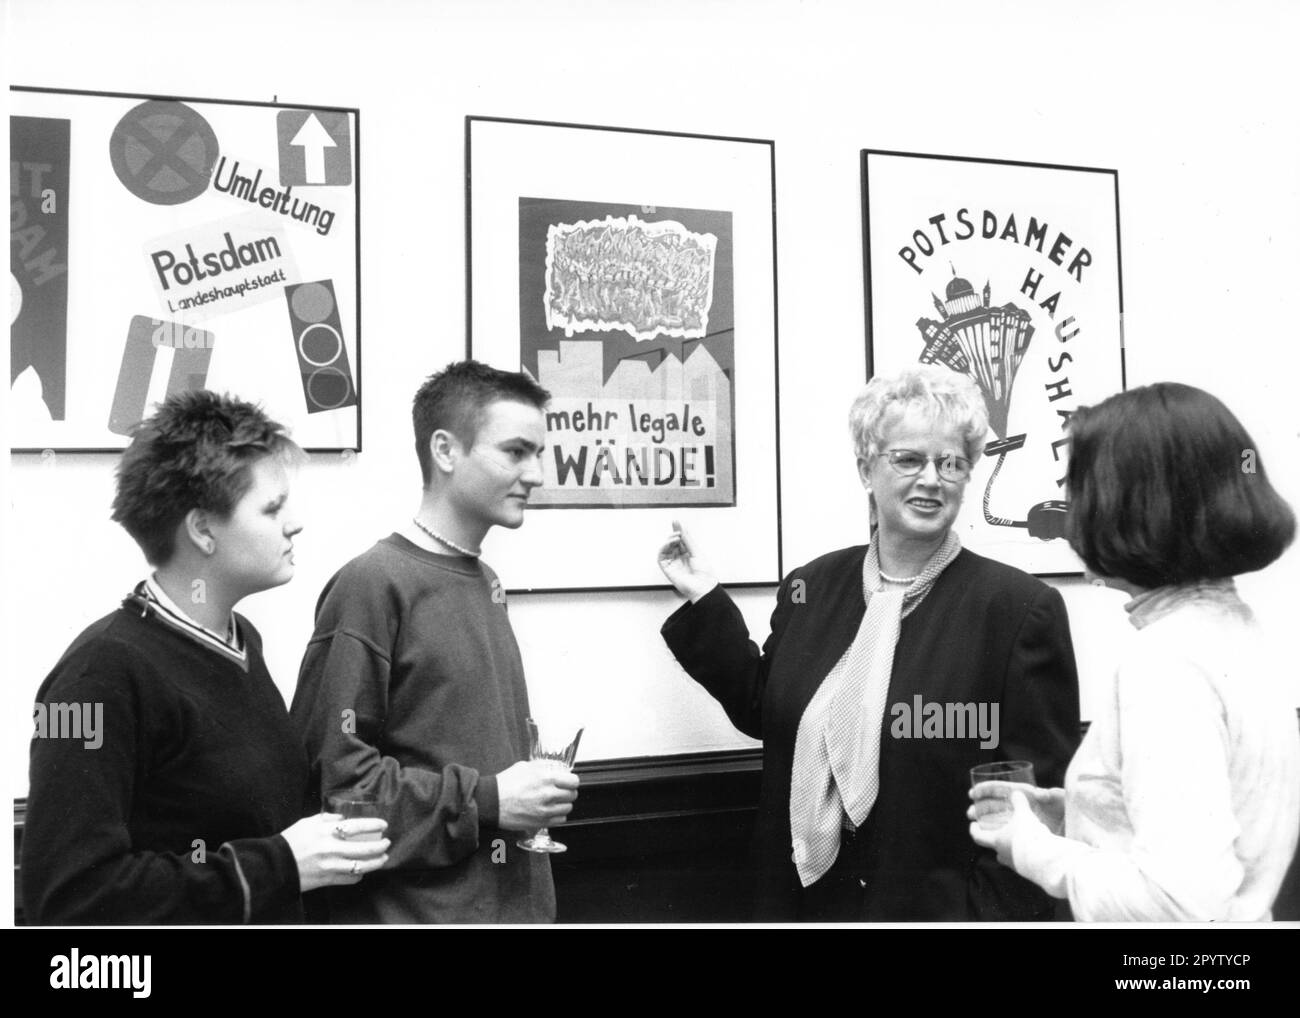 City president Birgit Müller(Left) talking to high school students about the students' posters. Photo: MAZ/Christel Köster, 04.03.1998 [automated translation] Stock Photo